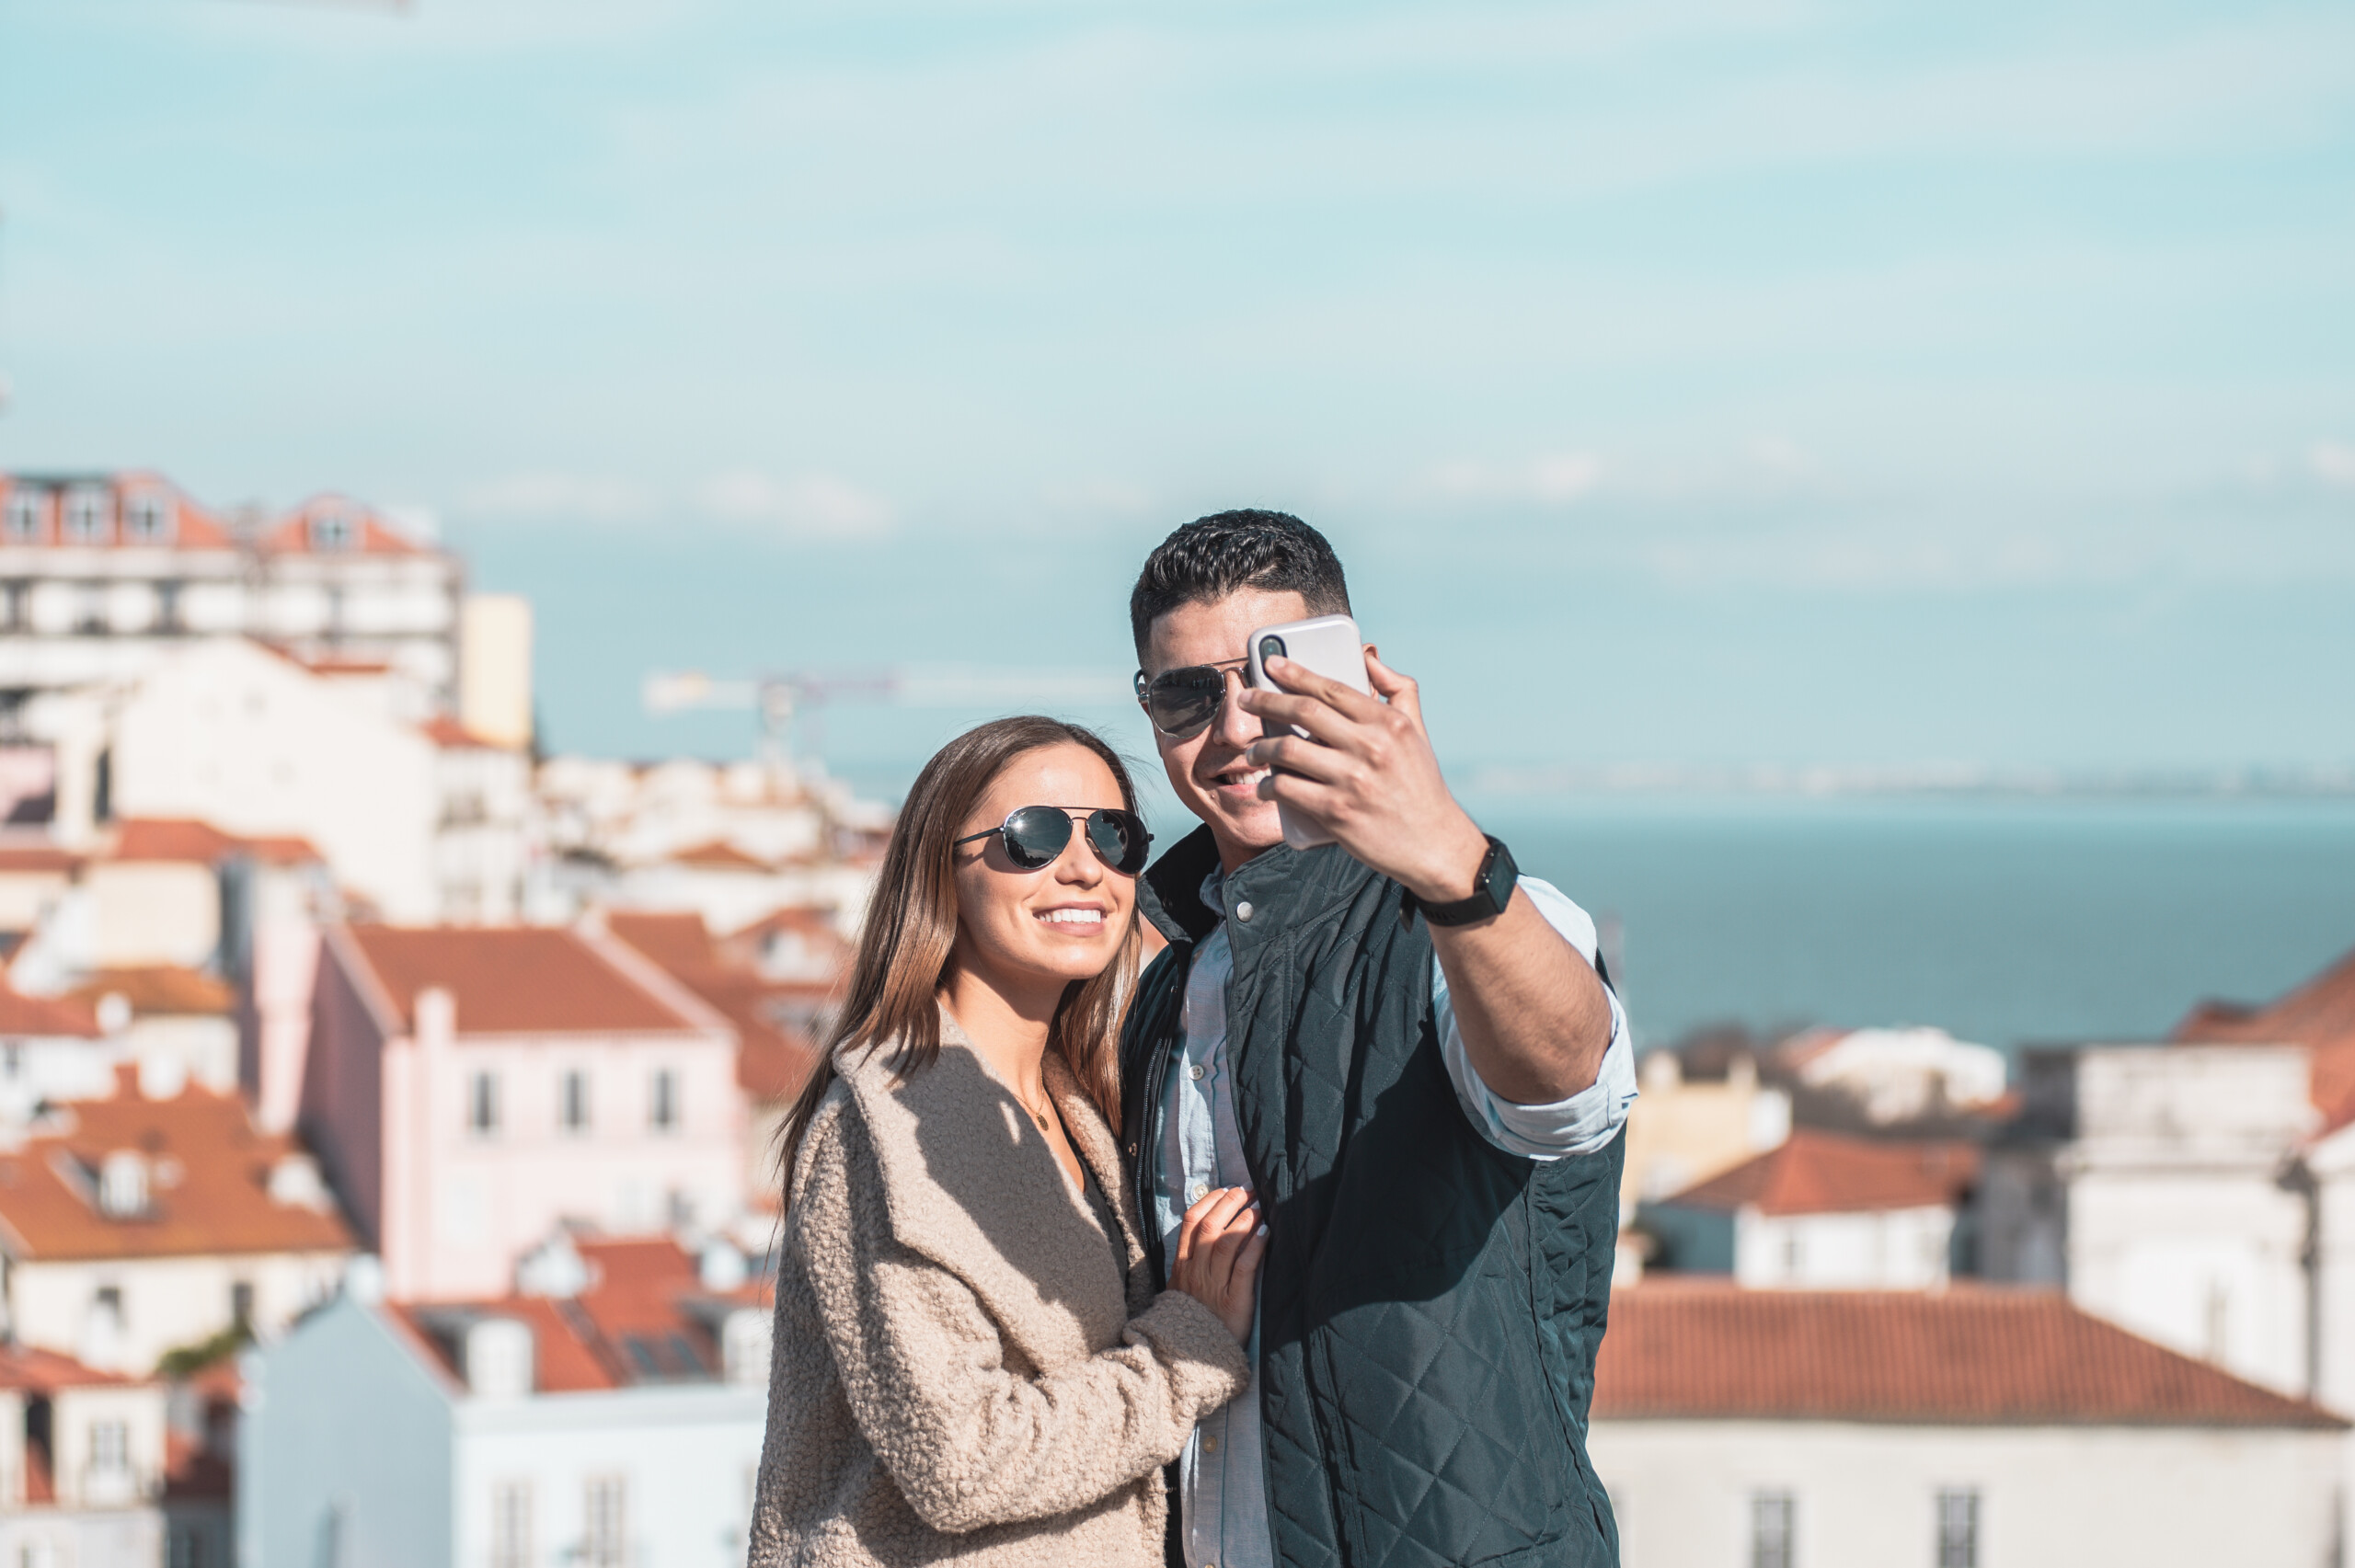 Proposal photoshoot by Carlos, Localgrapher in Lisbon